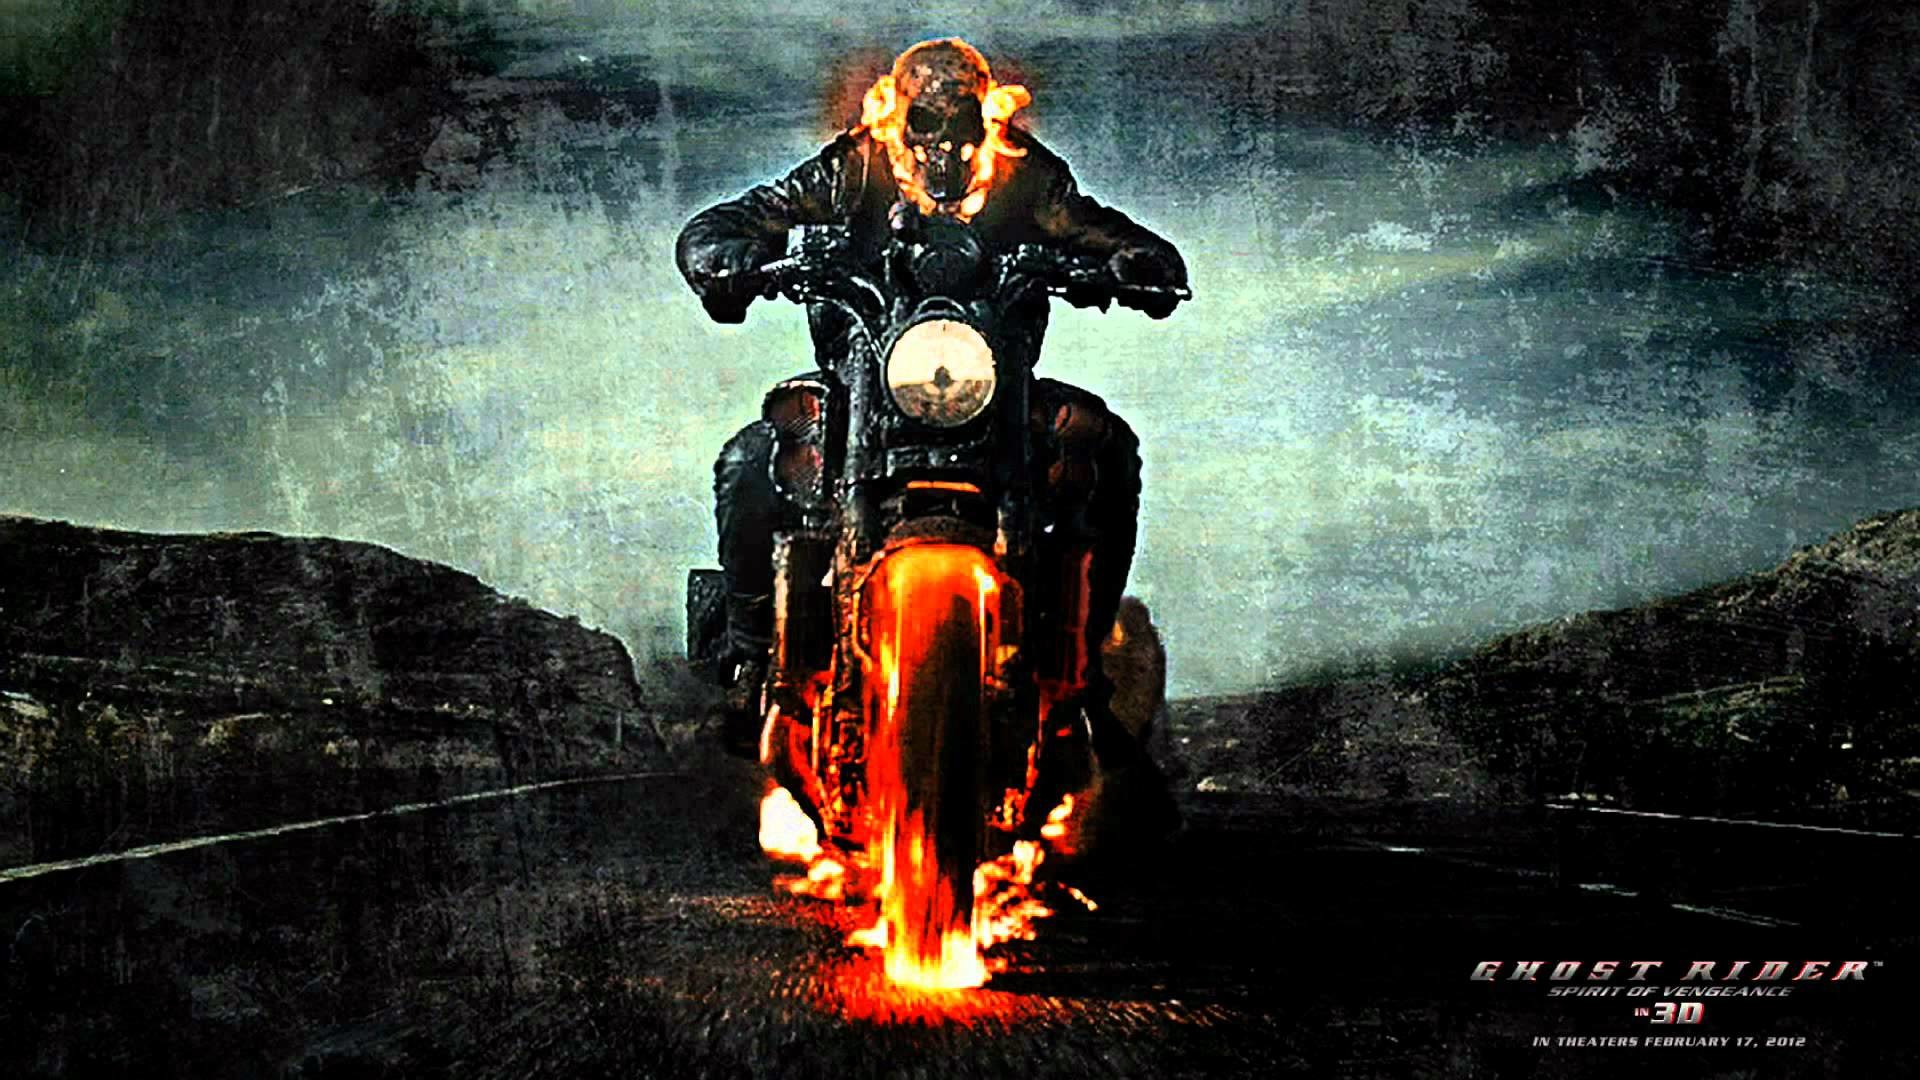 ghost rider agents of shield full movie download in hindi